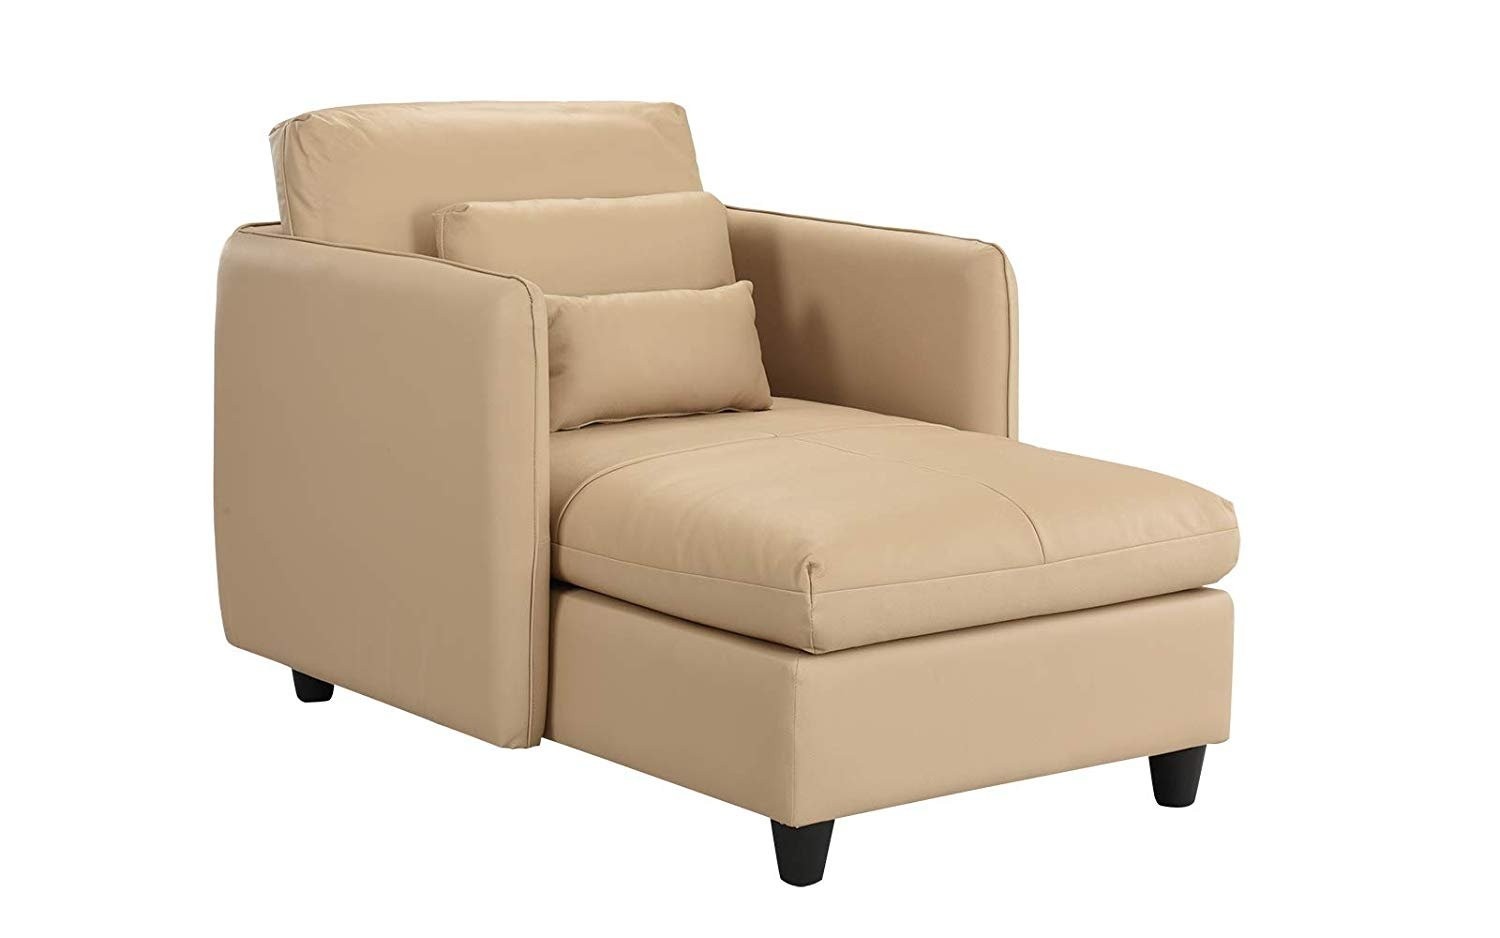 Small space chaise lounge for living room leather match